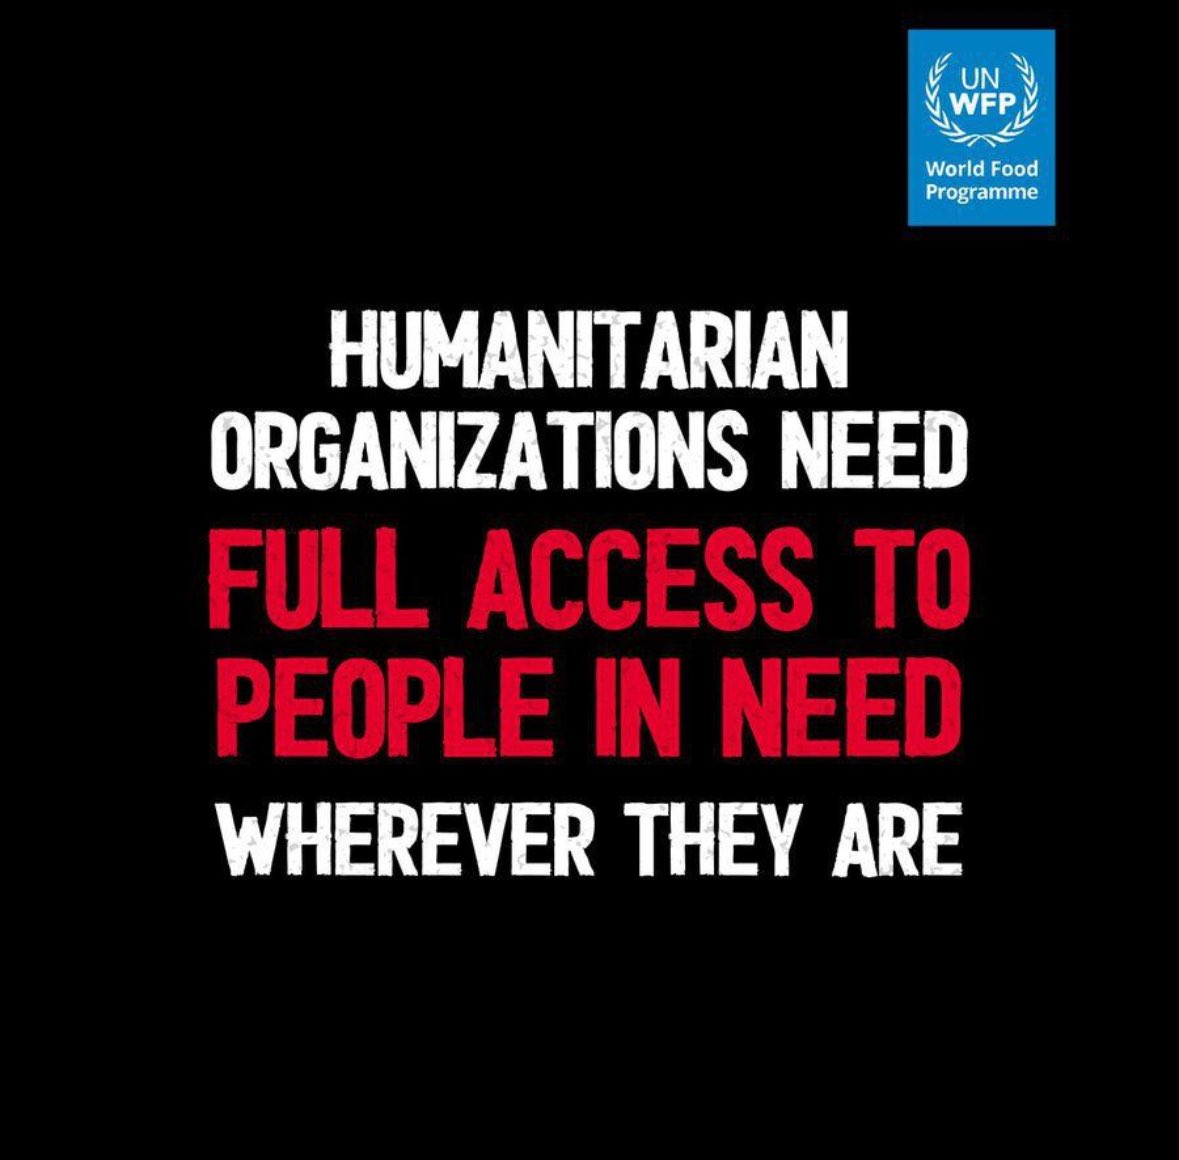 Access to food is a human right As hostilities continue in Gaza, Sudan, Ukraine, Myanmar, Yemen, DR congo, and in conflicts worldwide, people are struggling to meet their most basic needs Humanitarian organizations must have unhindered access to people in need wherever they are